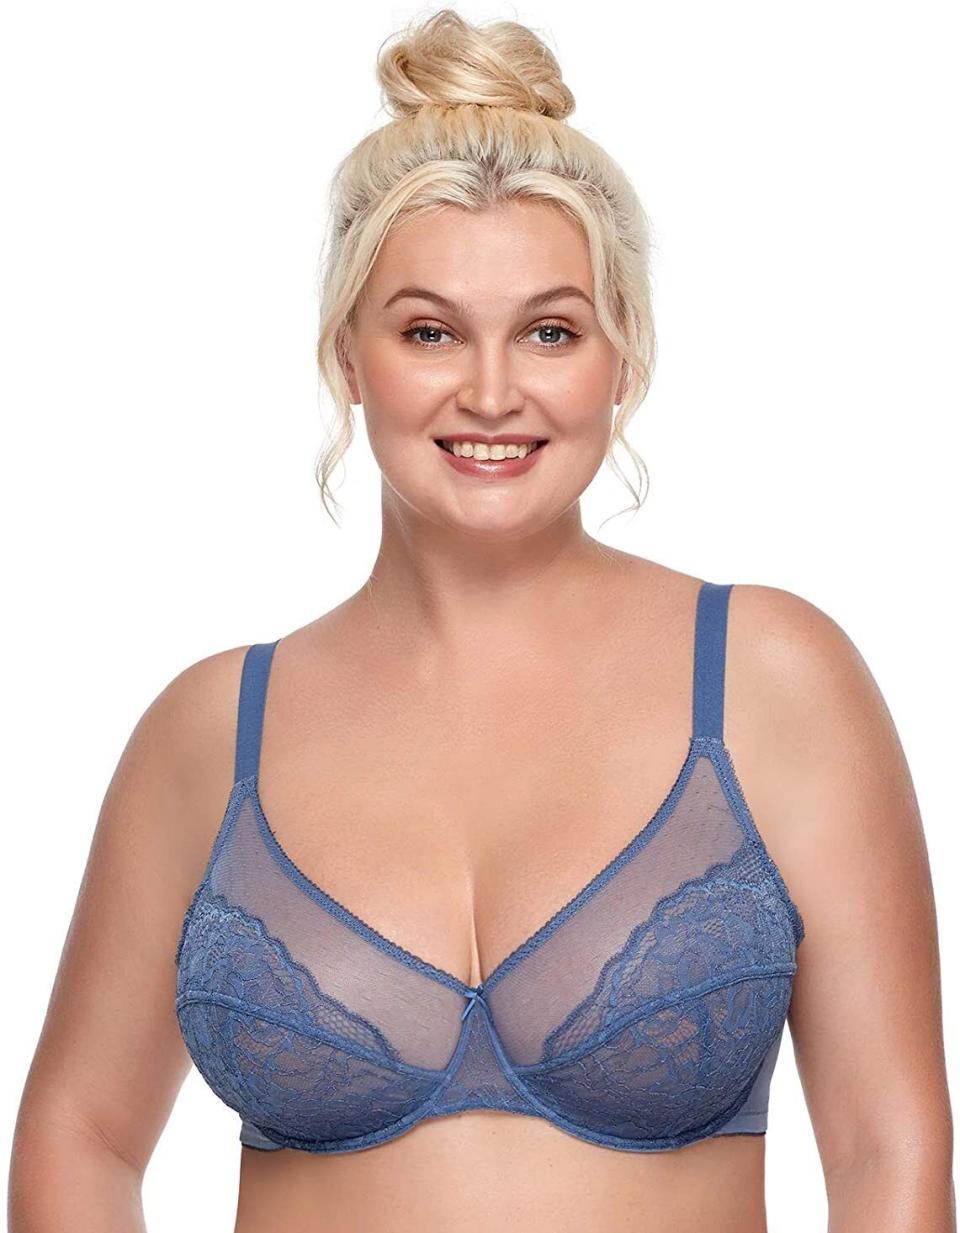 It'll always be there to offer you the support you need.<br /><br /><strong>Promising review:</strong> "Great bra, I wasn't sure how this was gonna work out since I don't buy bras online, but it turned out pretty good. Color is pretty true, sizing is also true, and I find it really comfortable because of the thick band. Doesn't dig into my armpits and doesn't ride up from behind. It's pretty light and thin, so far it's a great purchase." &mdash;<a href="https://www.amazon.com/gp/customer-reviews/R14K06TWJ2K8F0" target="_blank" rel="noopener noreferrer">Sipeish</a><br /><br /><strong>Get it from Amazon for <a href="https://www.amazon.com/dp/B086SXK6SJ" target="_blank" rel="noopener noreferrer">$17.84+</a> (available in 21 colors, and sizes 32C&ndash;44DDD).</strong>